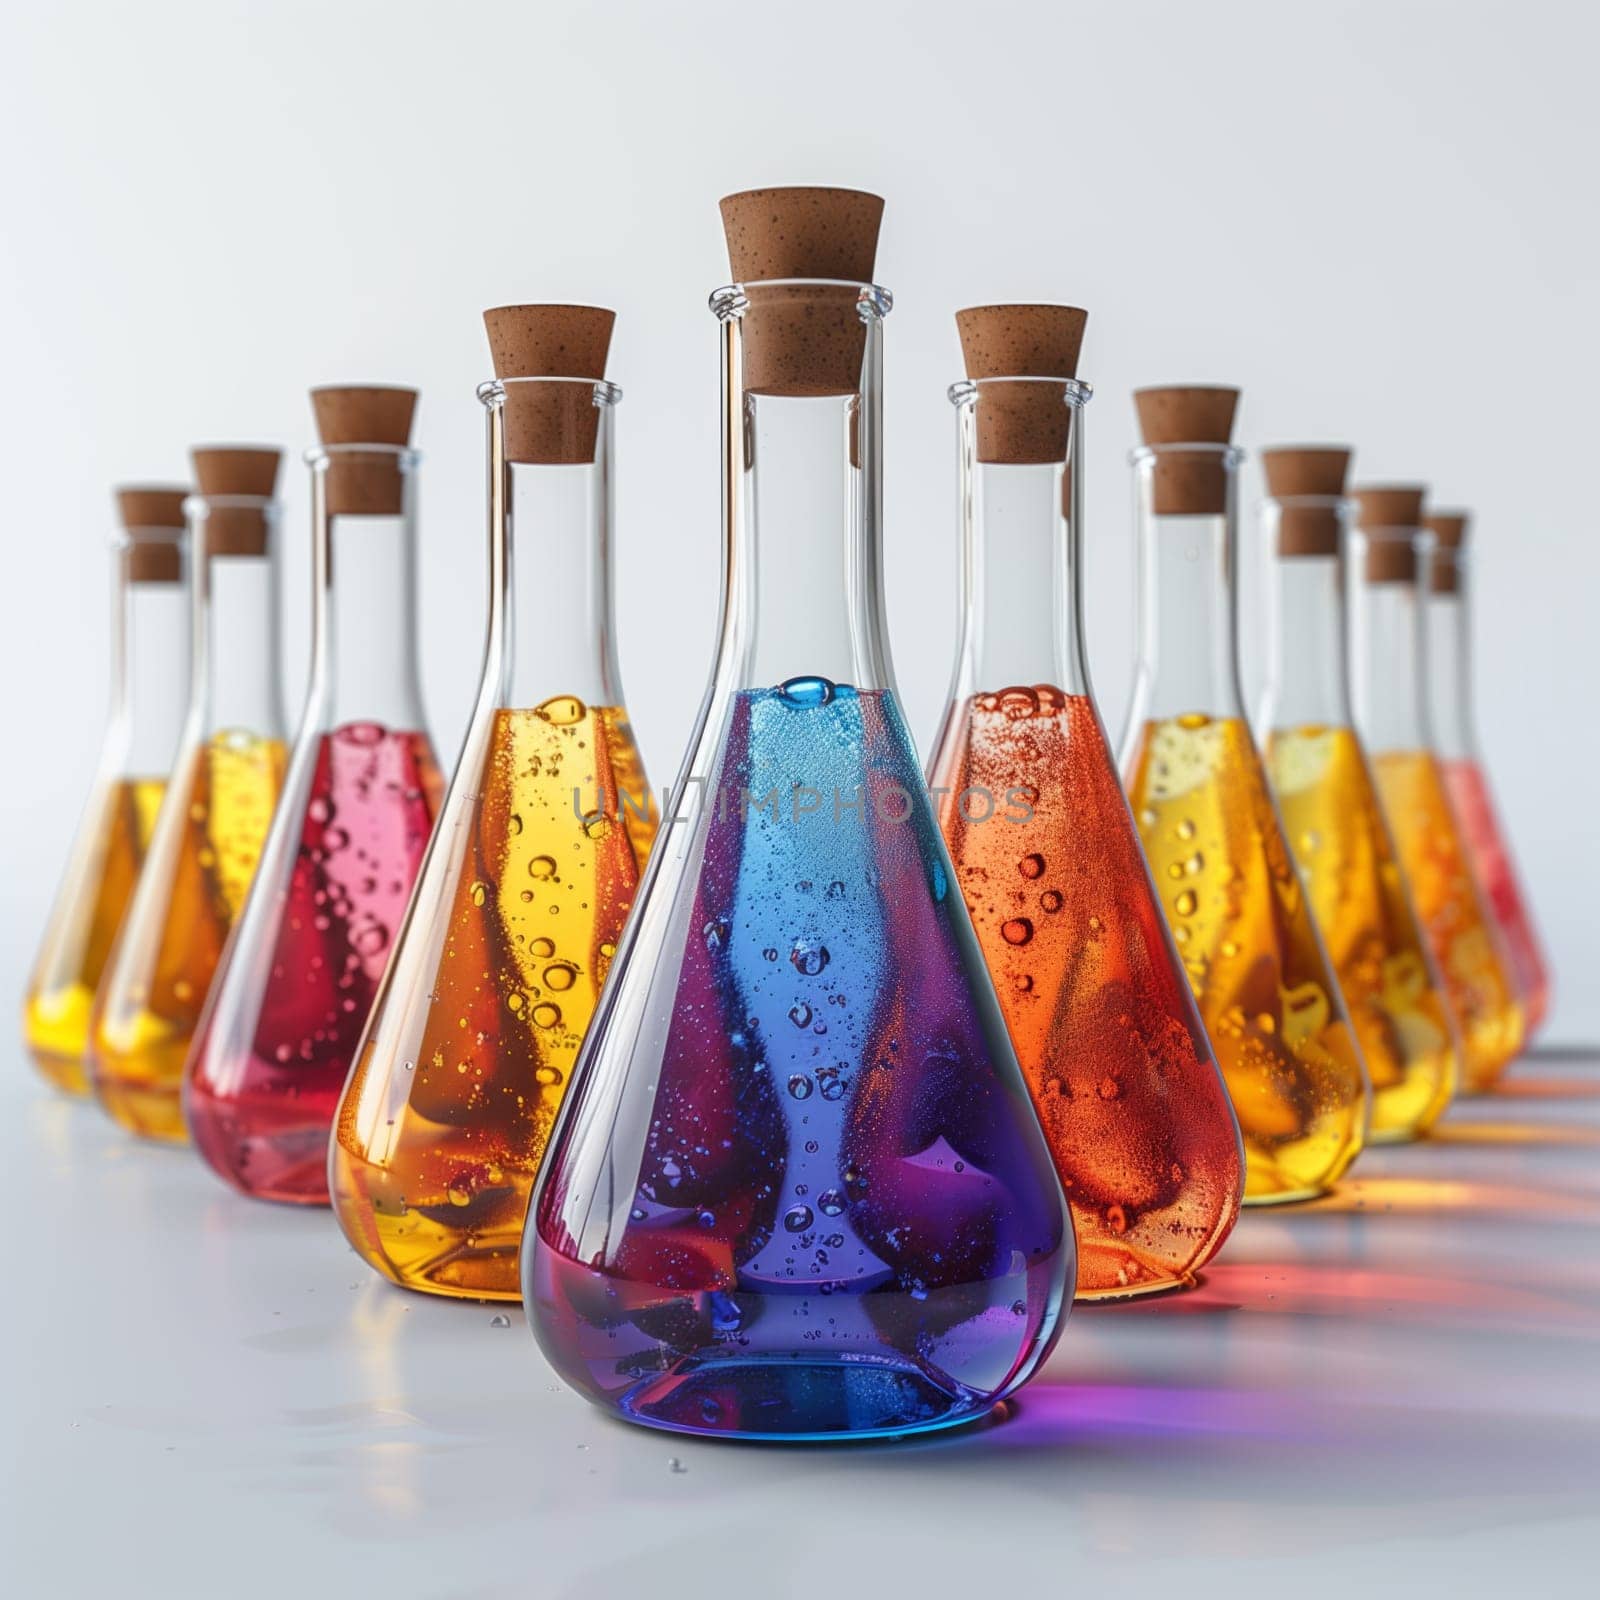 Array of colorful liquidfilled drinkware bottles for alcoholic beverages by richwolf